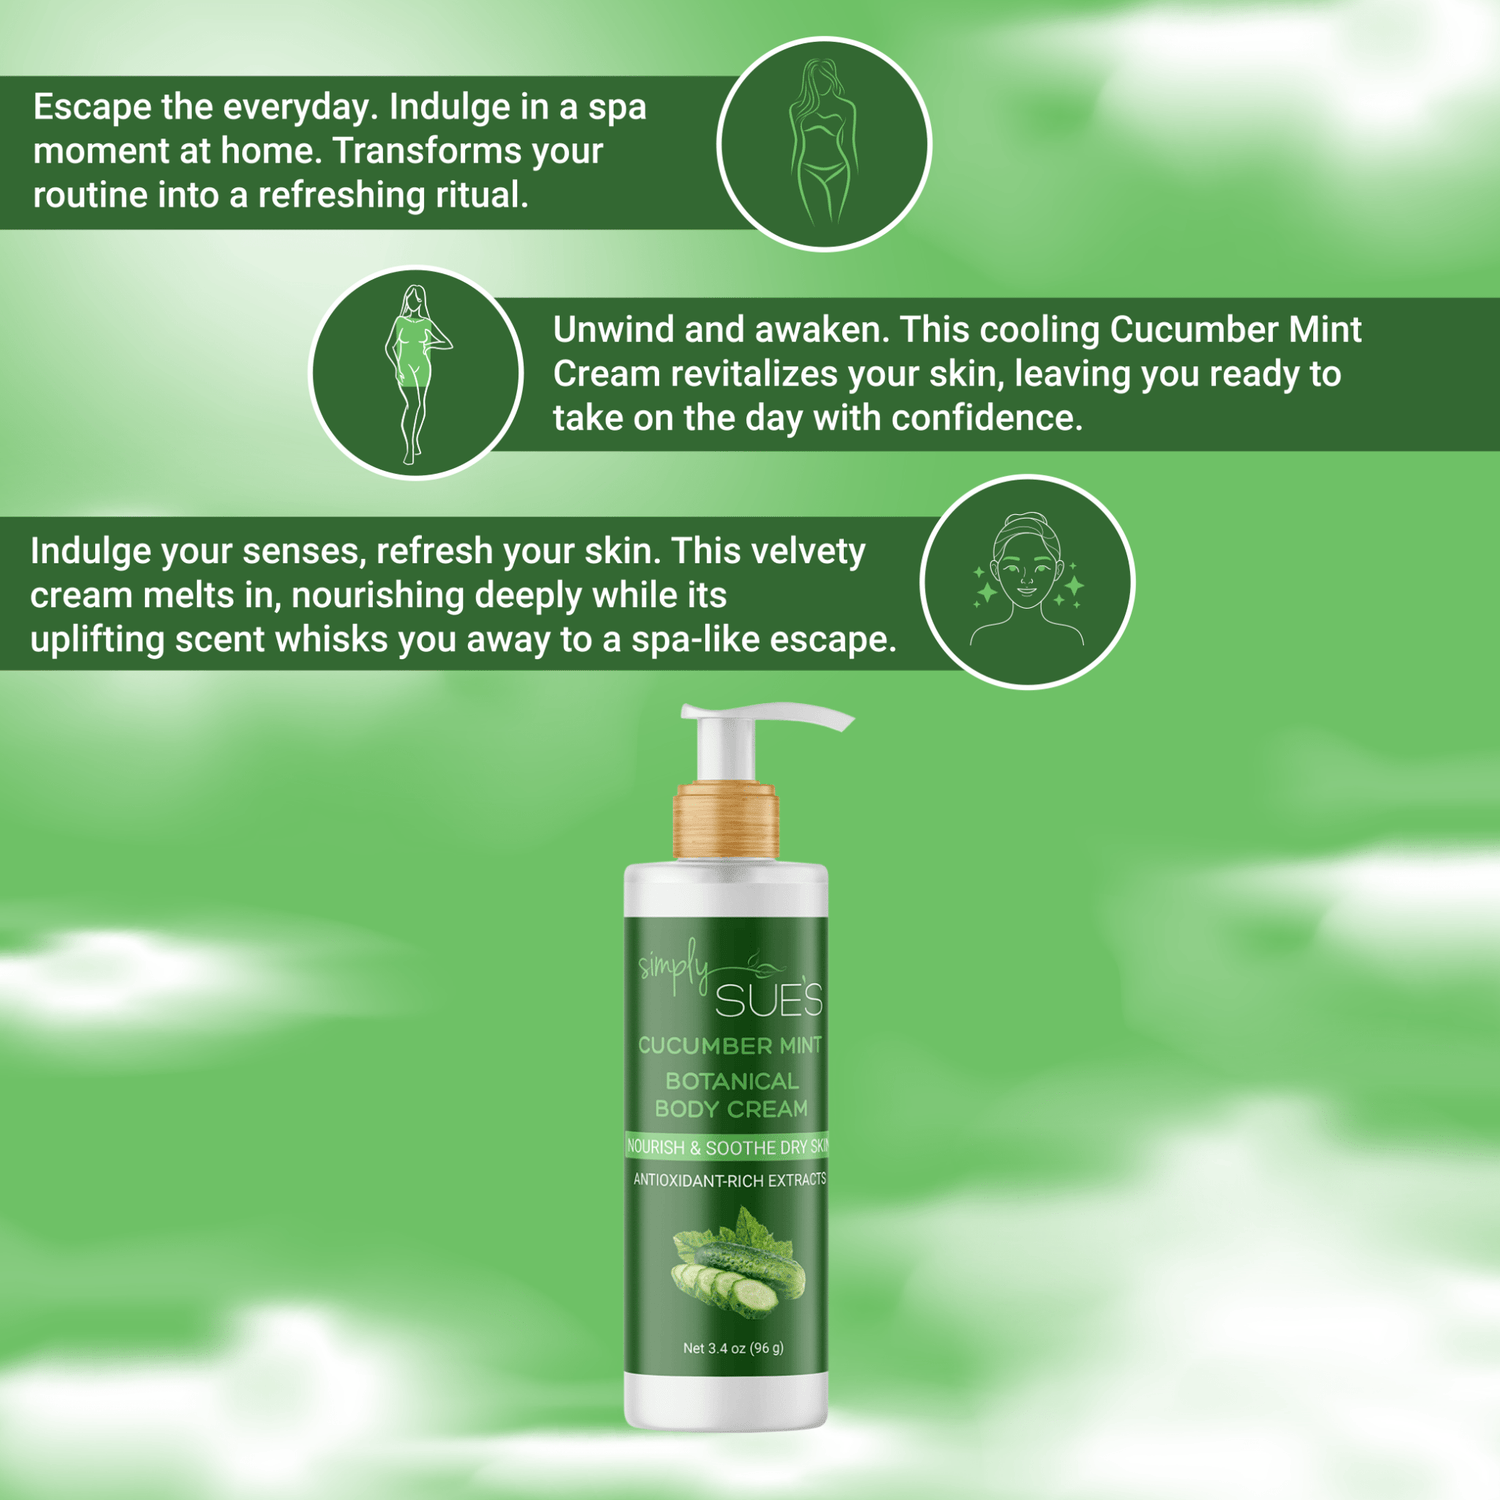 Infographic: Benefits of adding Cucumber Mint Body Cream to your self-care routine